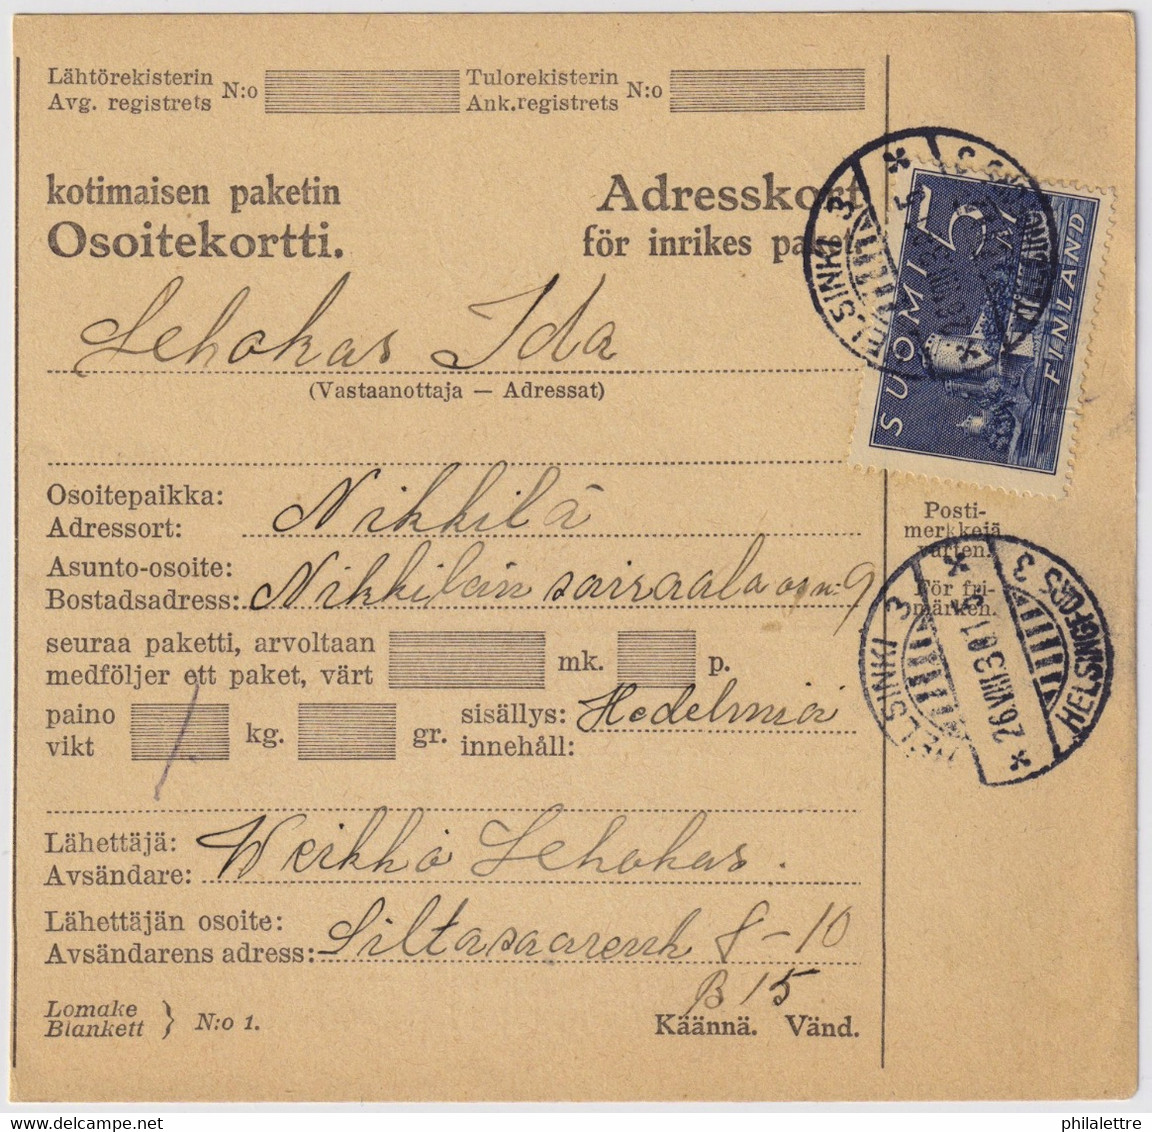 FINLANDE / SUOMI FINLAND 1930 HELSINKI 3 To NICKBY - Osoitekortti / Packet Post Address Card - Lettres & Documents